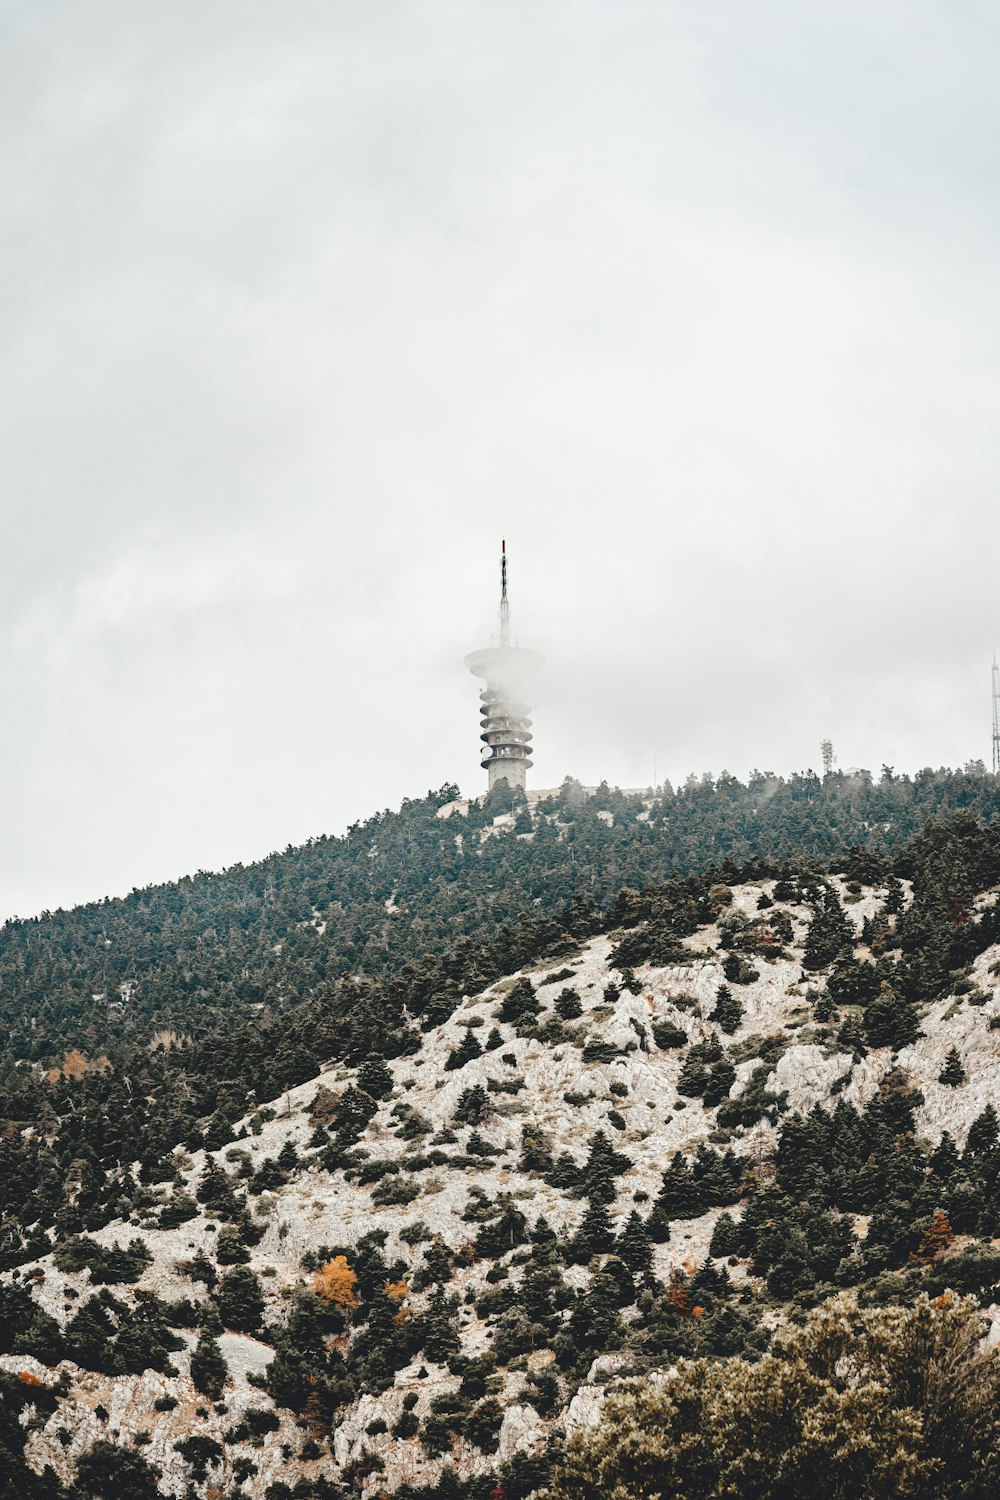 a mountain with a radio tower on top of it